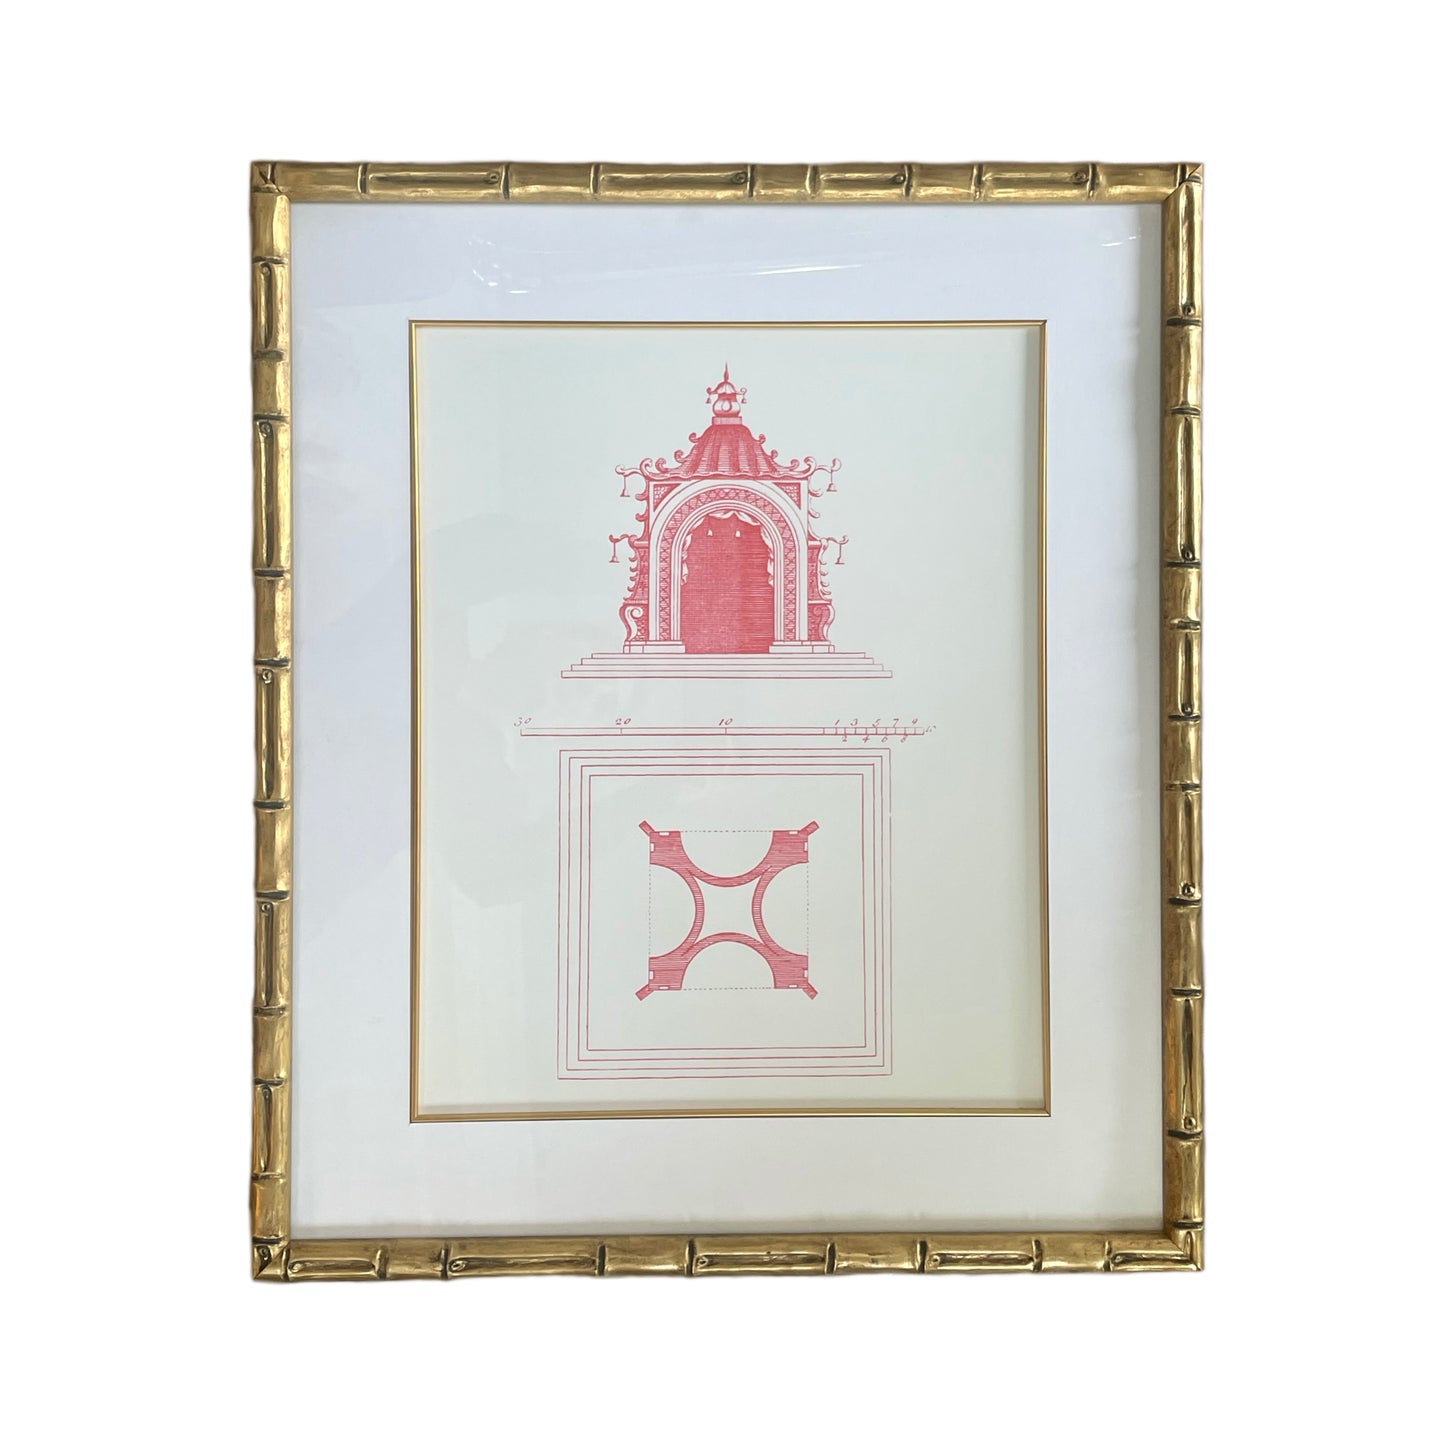 Coral Pagoda Framed Lithograph